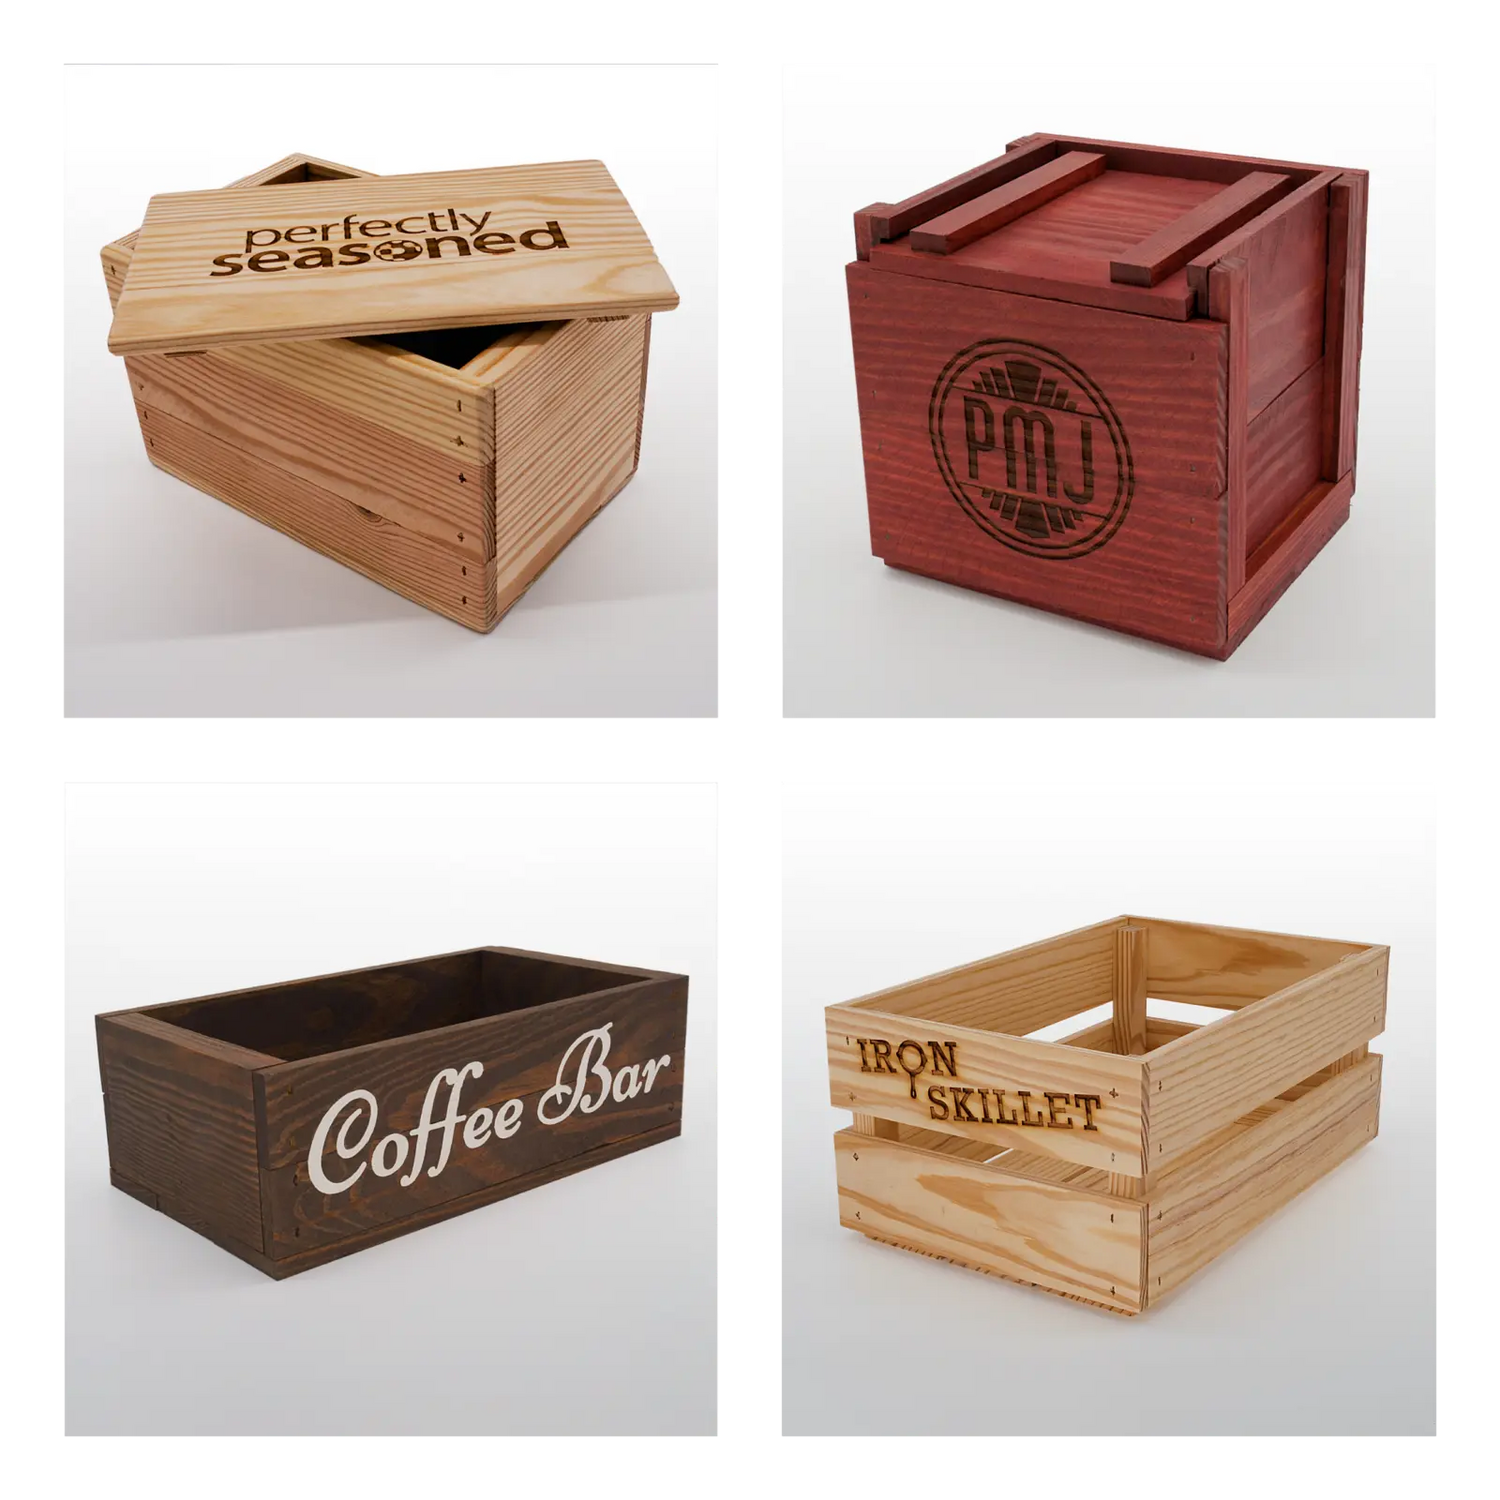 Custom made wooded crates and boxes by Carpenter Core